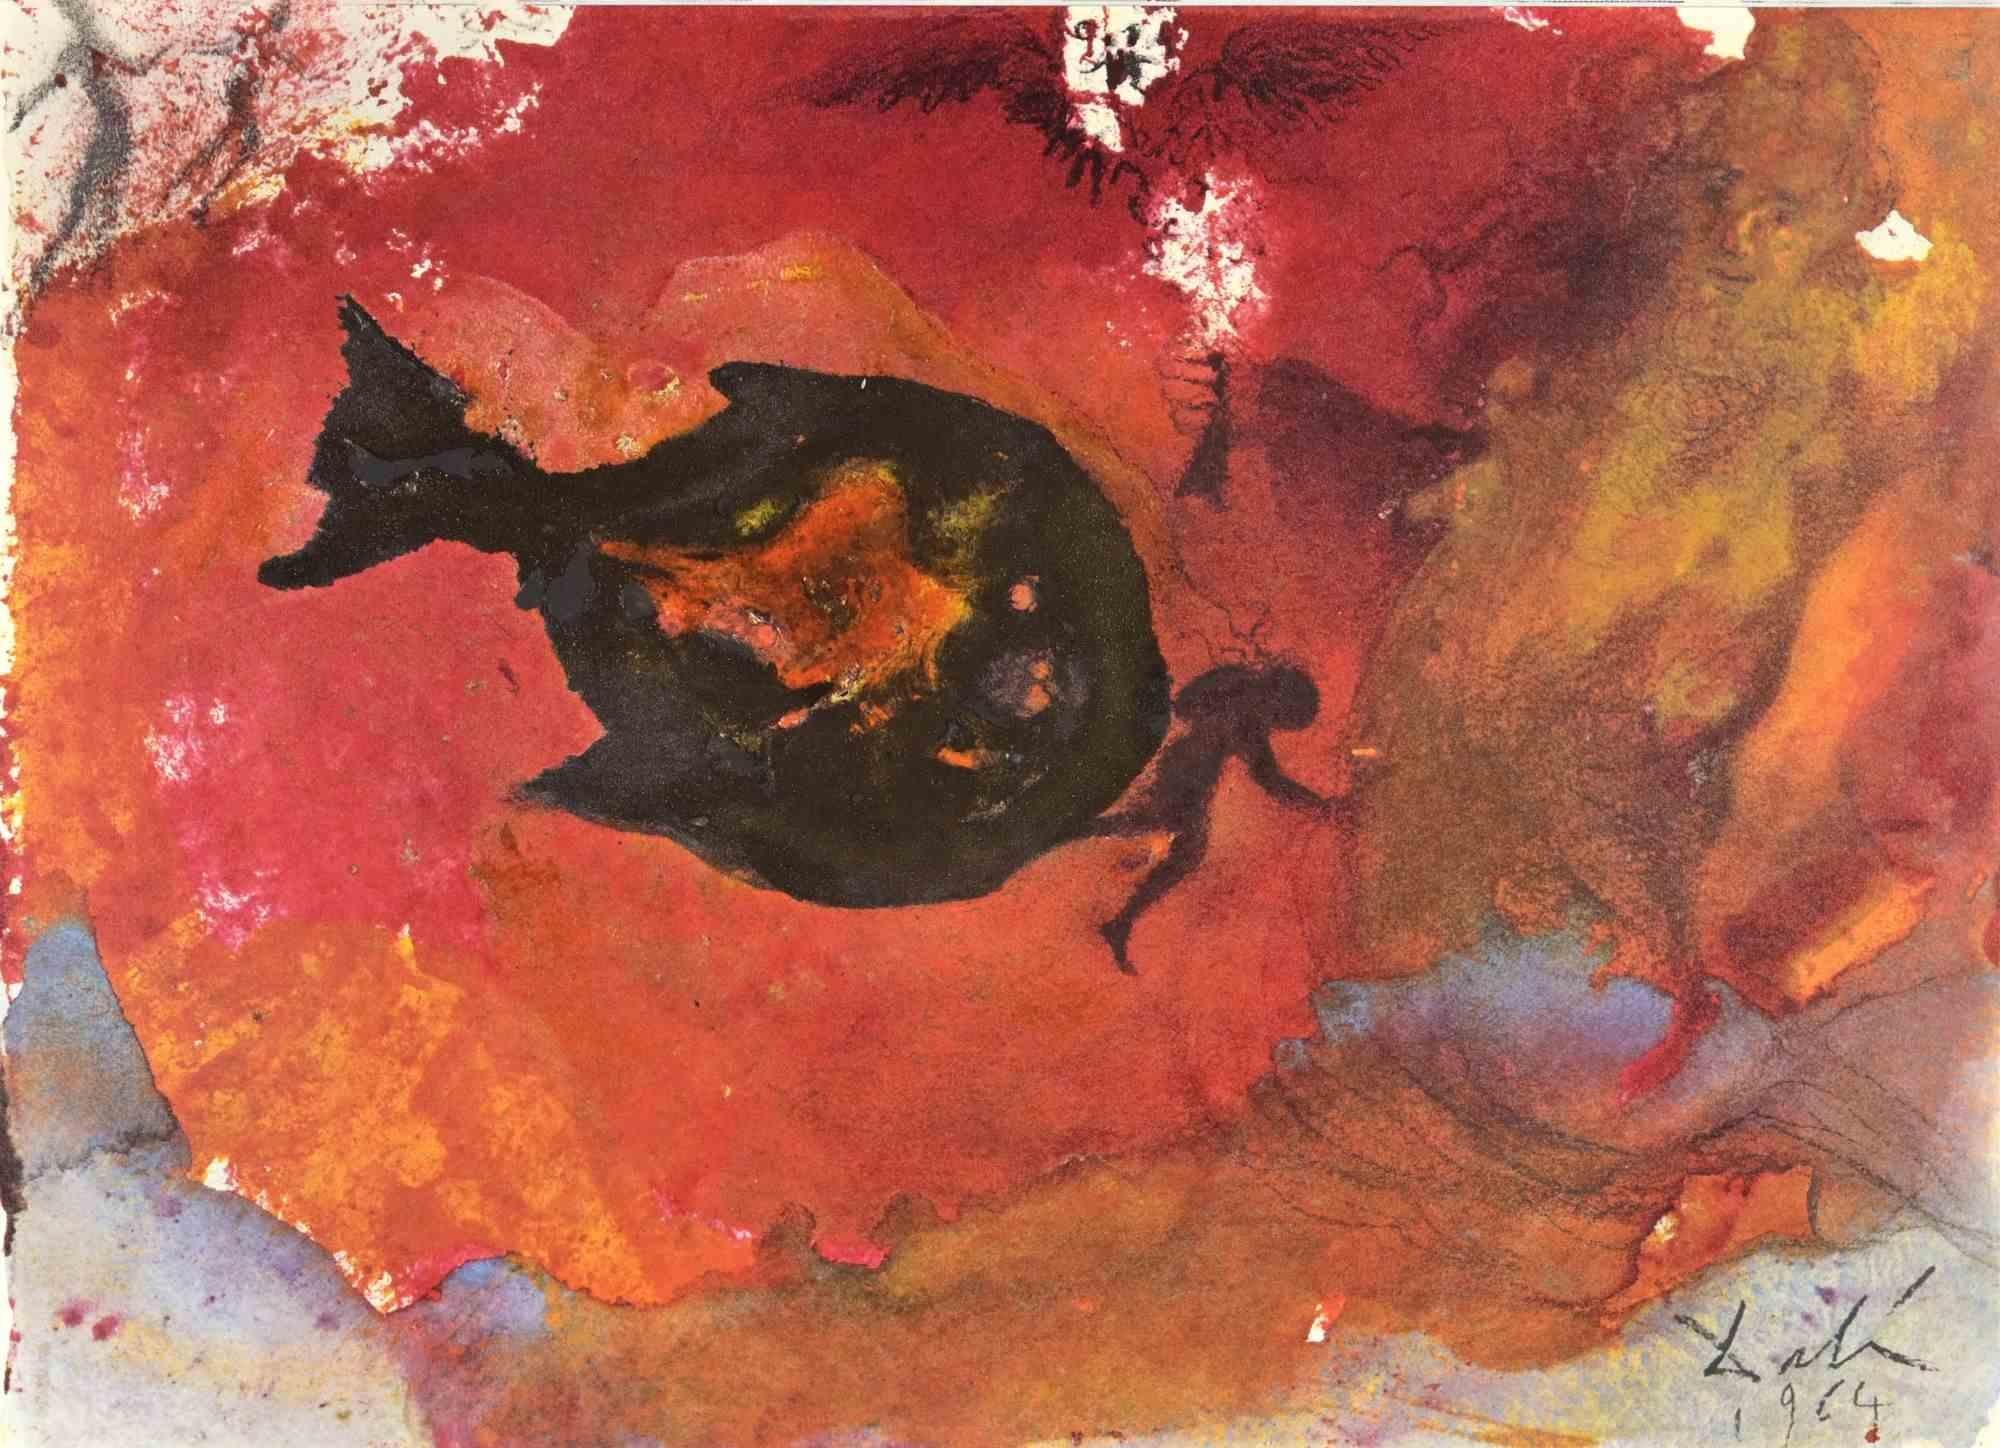 Salvador Dalí Figurative Print - Jonah in the Belly of the Whale -  Lithograph - 1964